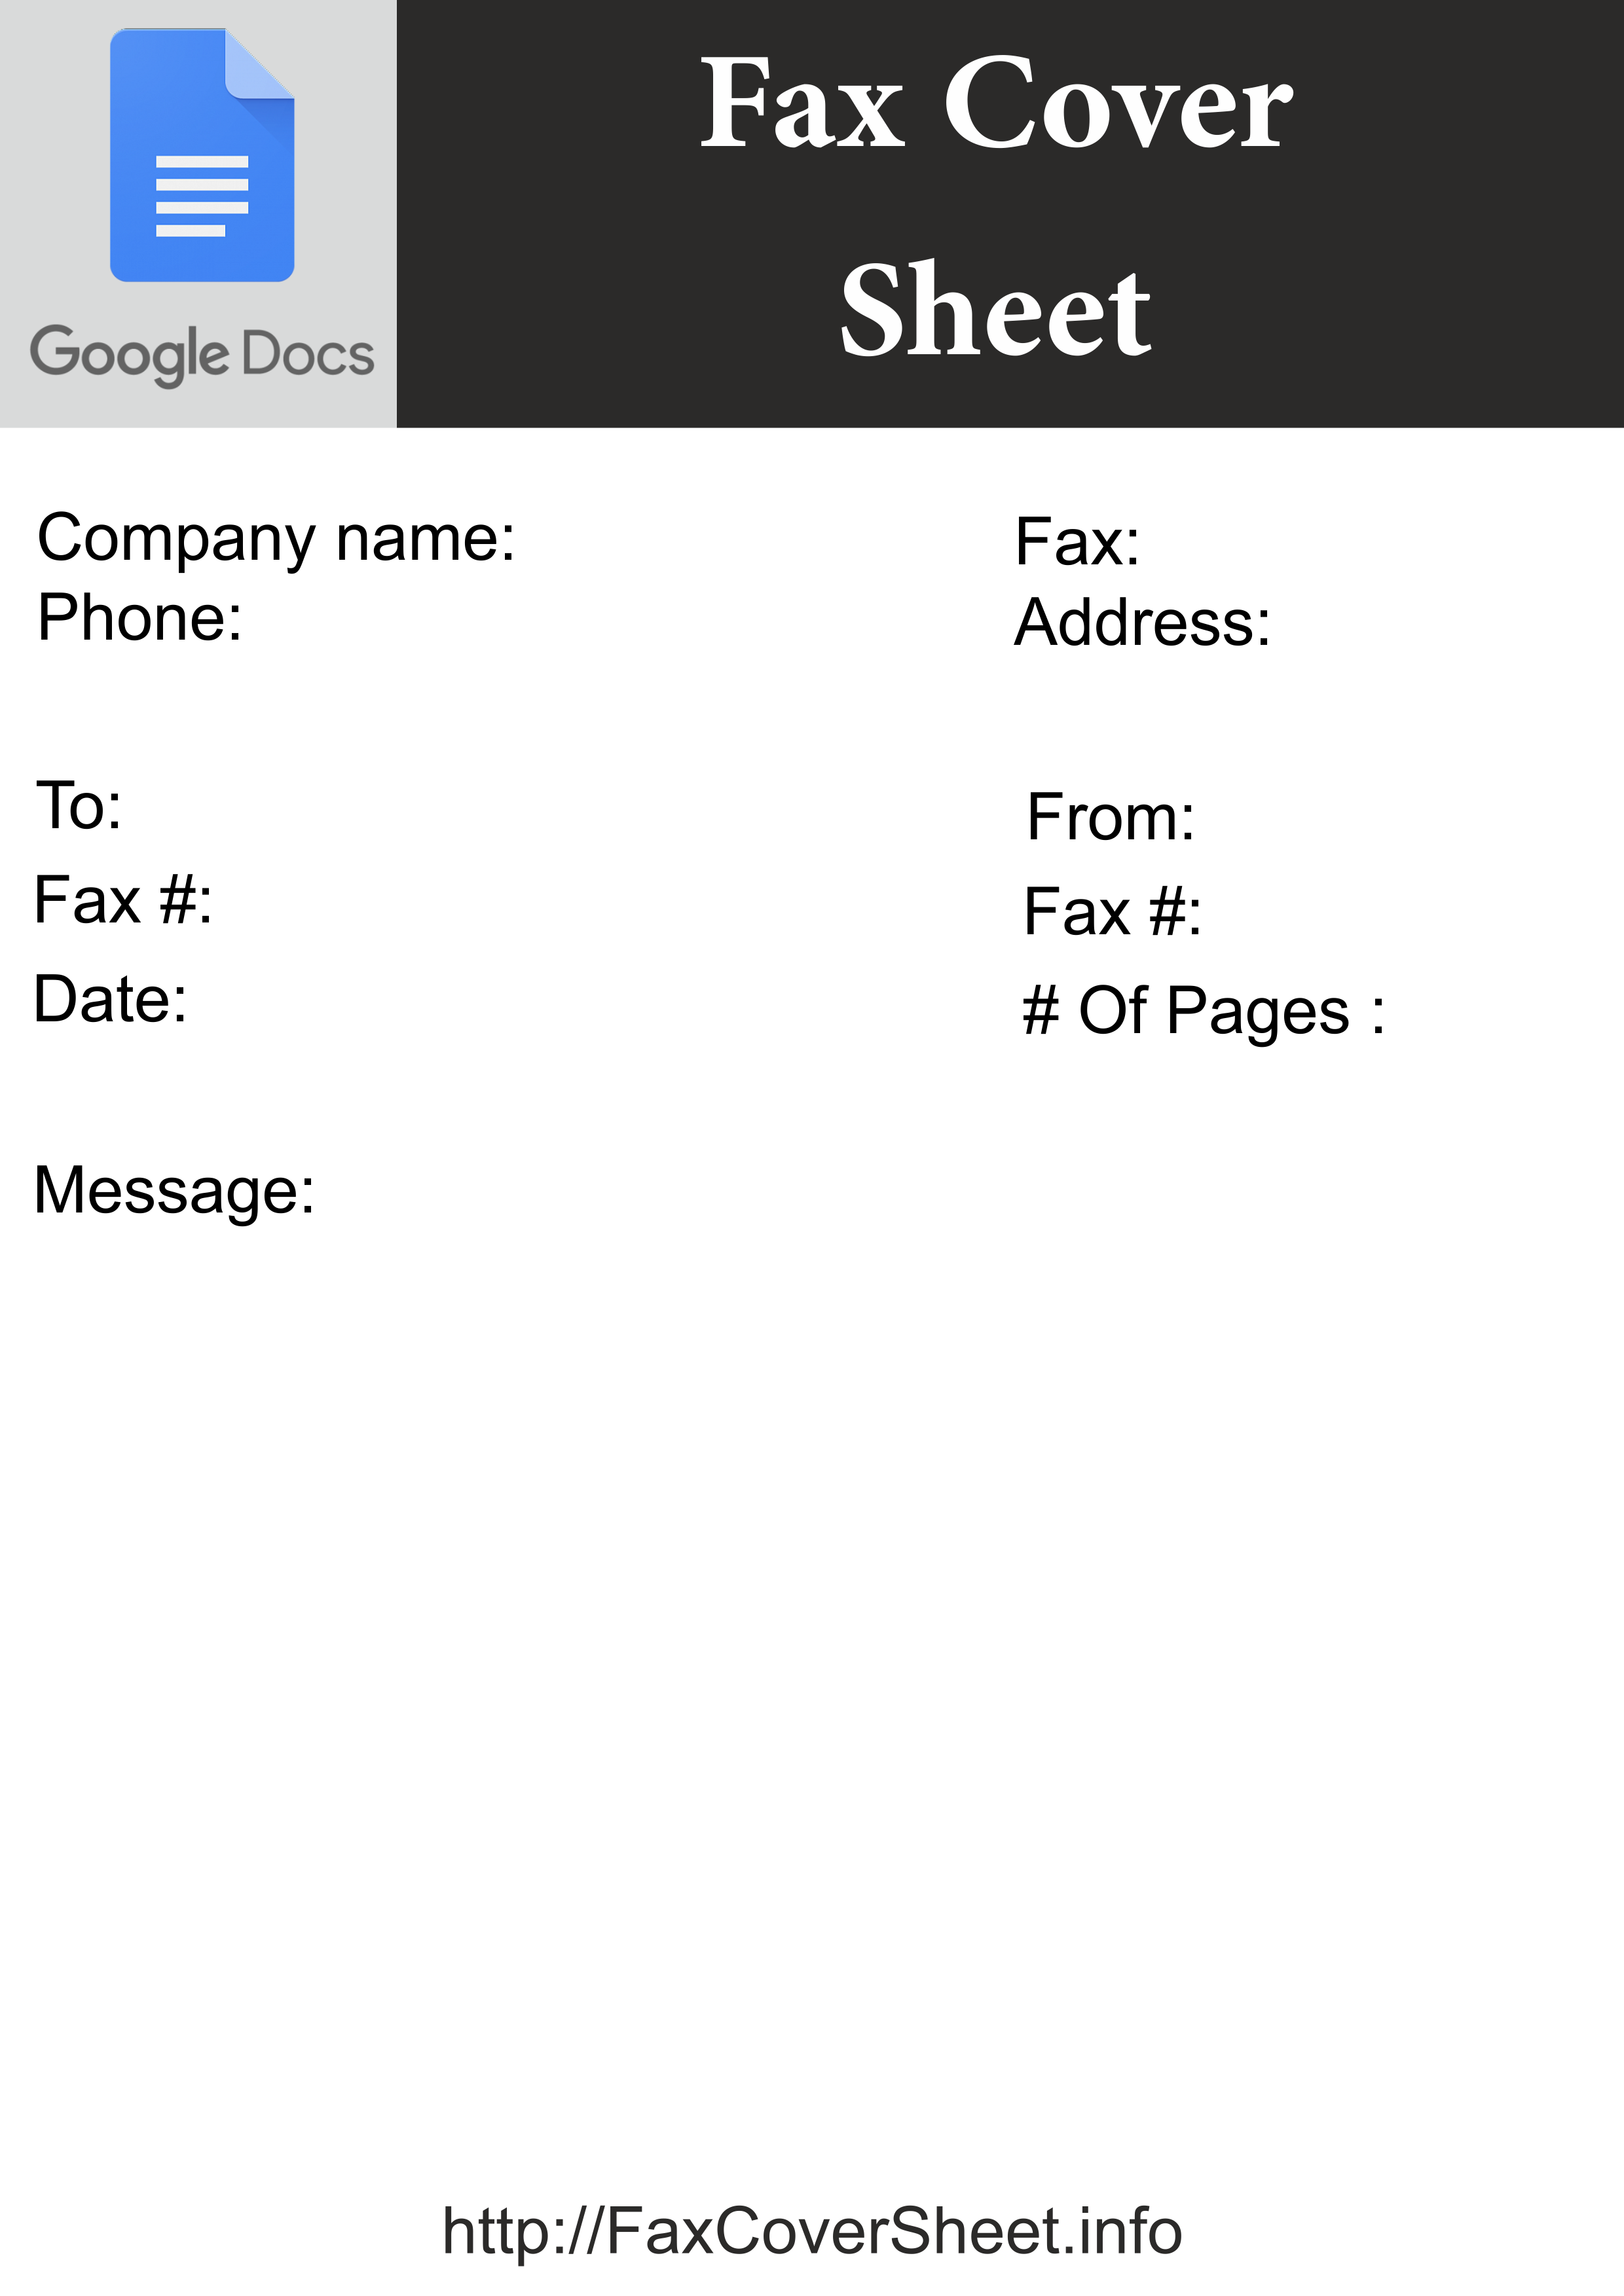 Ready To Use Google Docs Fax Cover Sheet Free Fax Cover Sheet